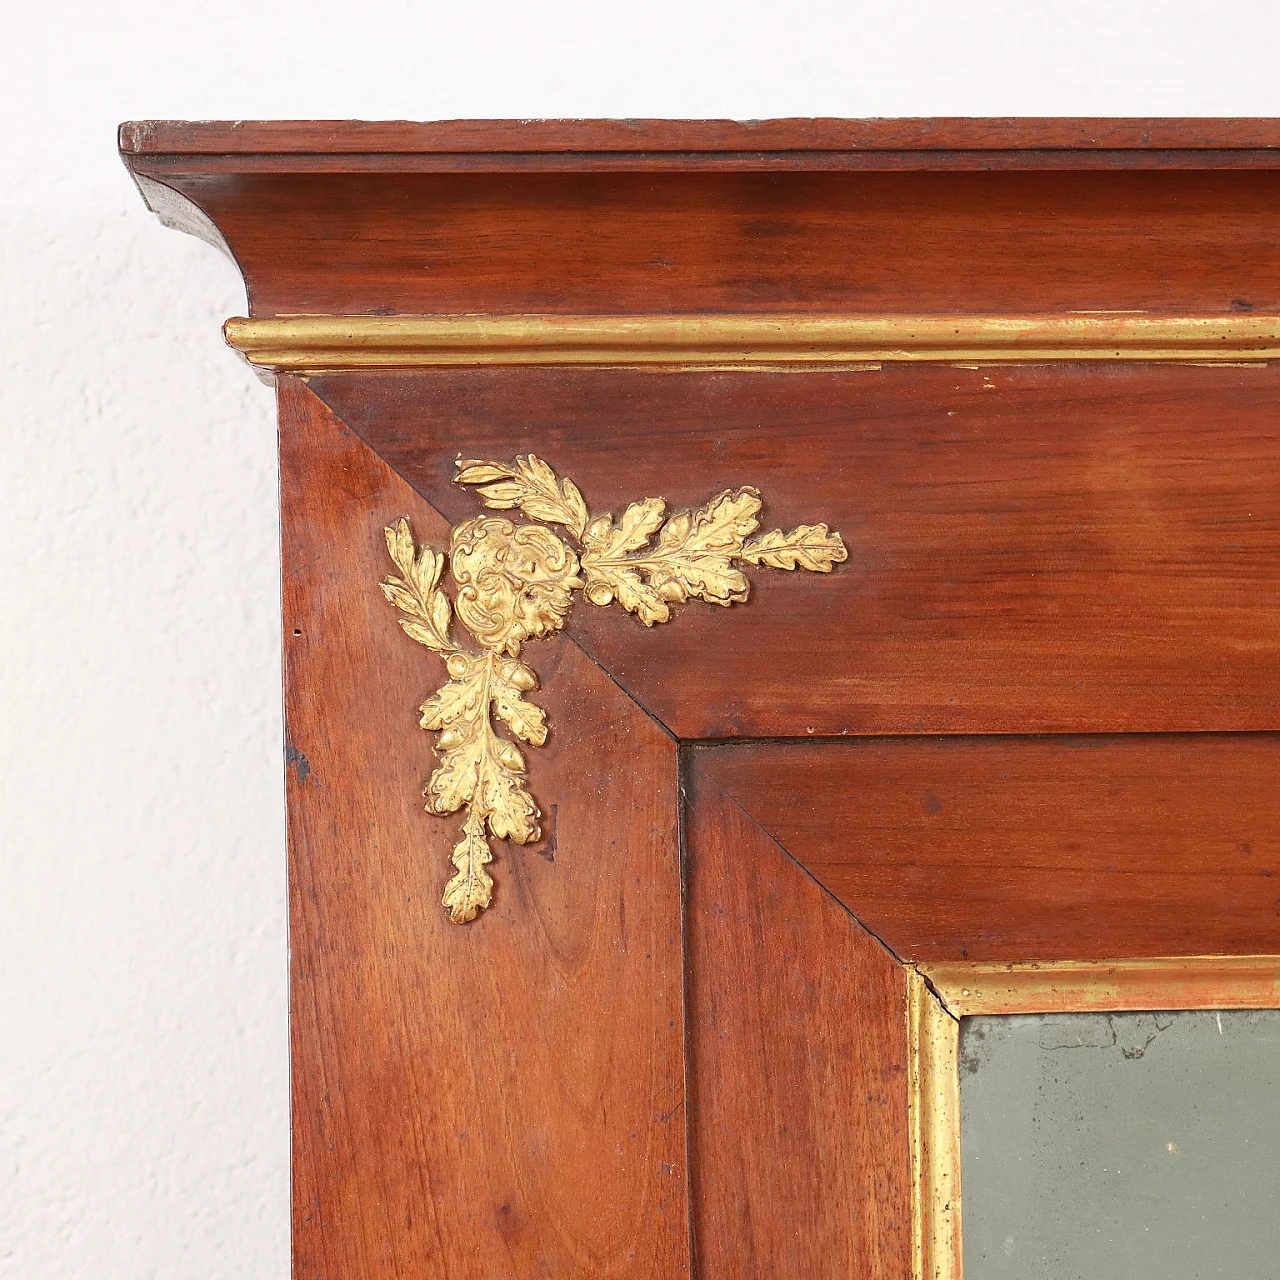 Mahogany mantelpiece with leaf motifs, late 19th century 3